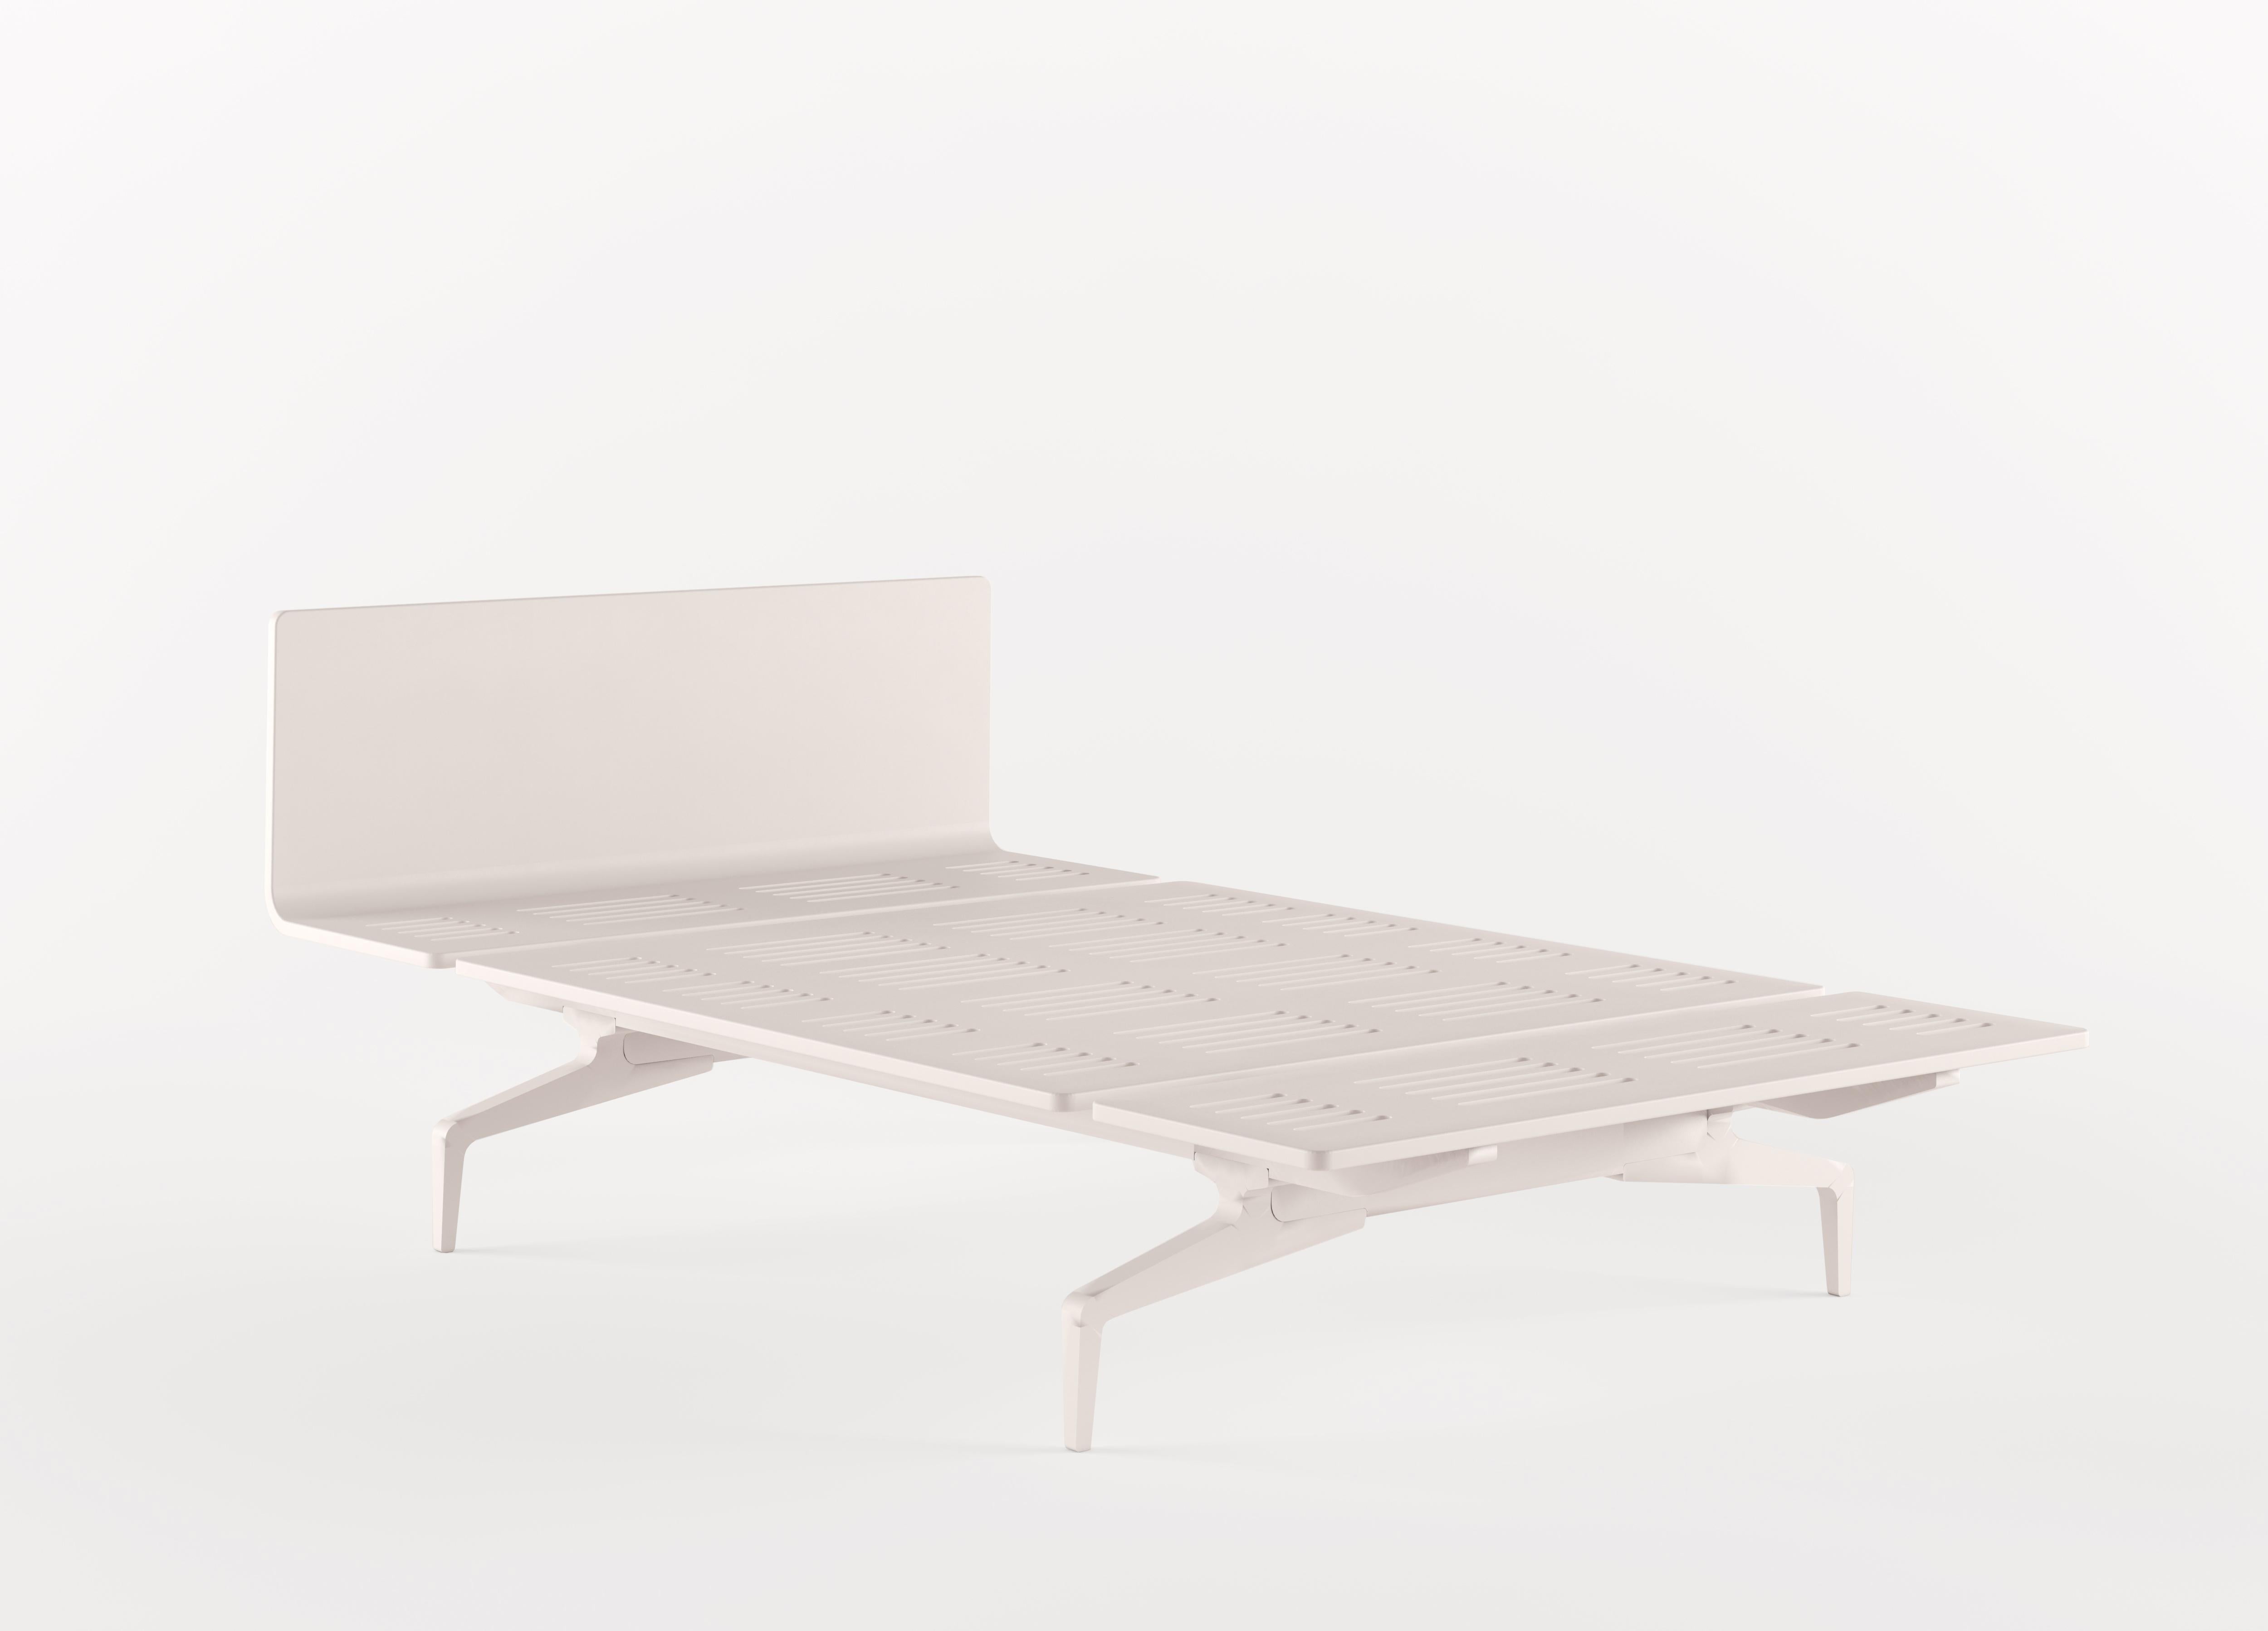 Alias Small LL3 Legnoletto Bed in White Matt Lacquer Frame by Alfredo Häberli

Bed with headboard with medium edge and foot without edge matt lacquered; legs in polished or lacquered die-cast aluminium. Dimensions: - 90x206 cm (suggested mattress